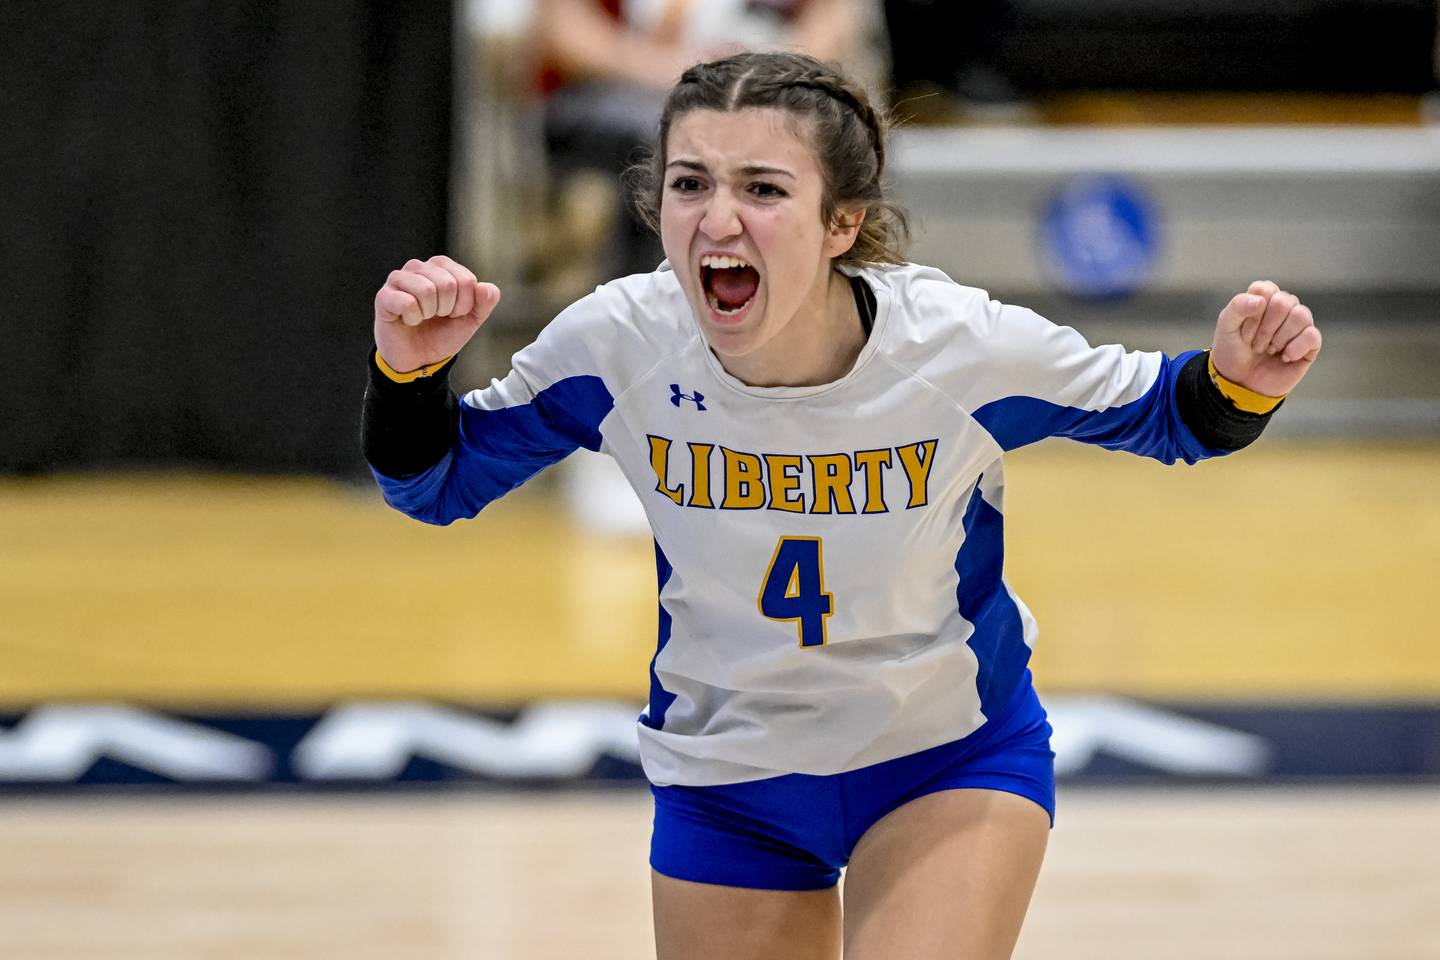 Liberty’s Grace Maerten (4) celebrates a point during the MPSSAA 2A Volleyball State Championship matchup between Liberty High School and Middletown High School at the APG Federal Credit Union Arena in Bel Air, Maryland.